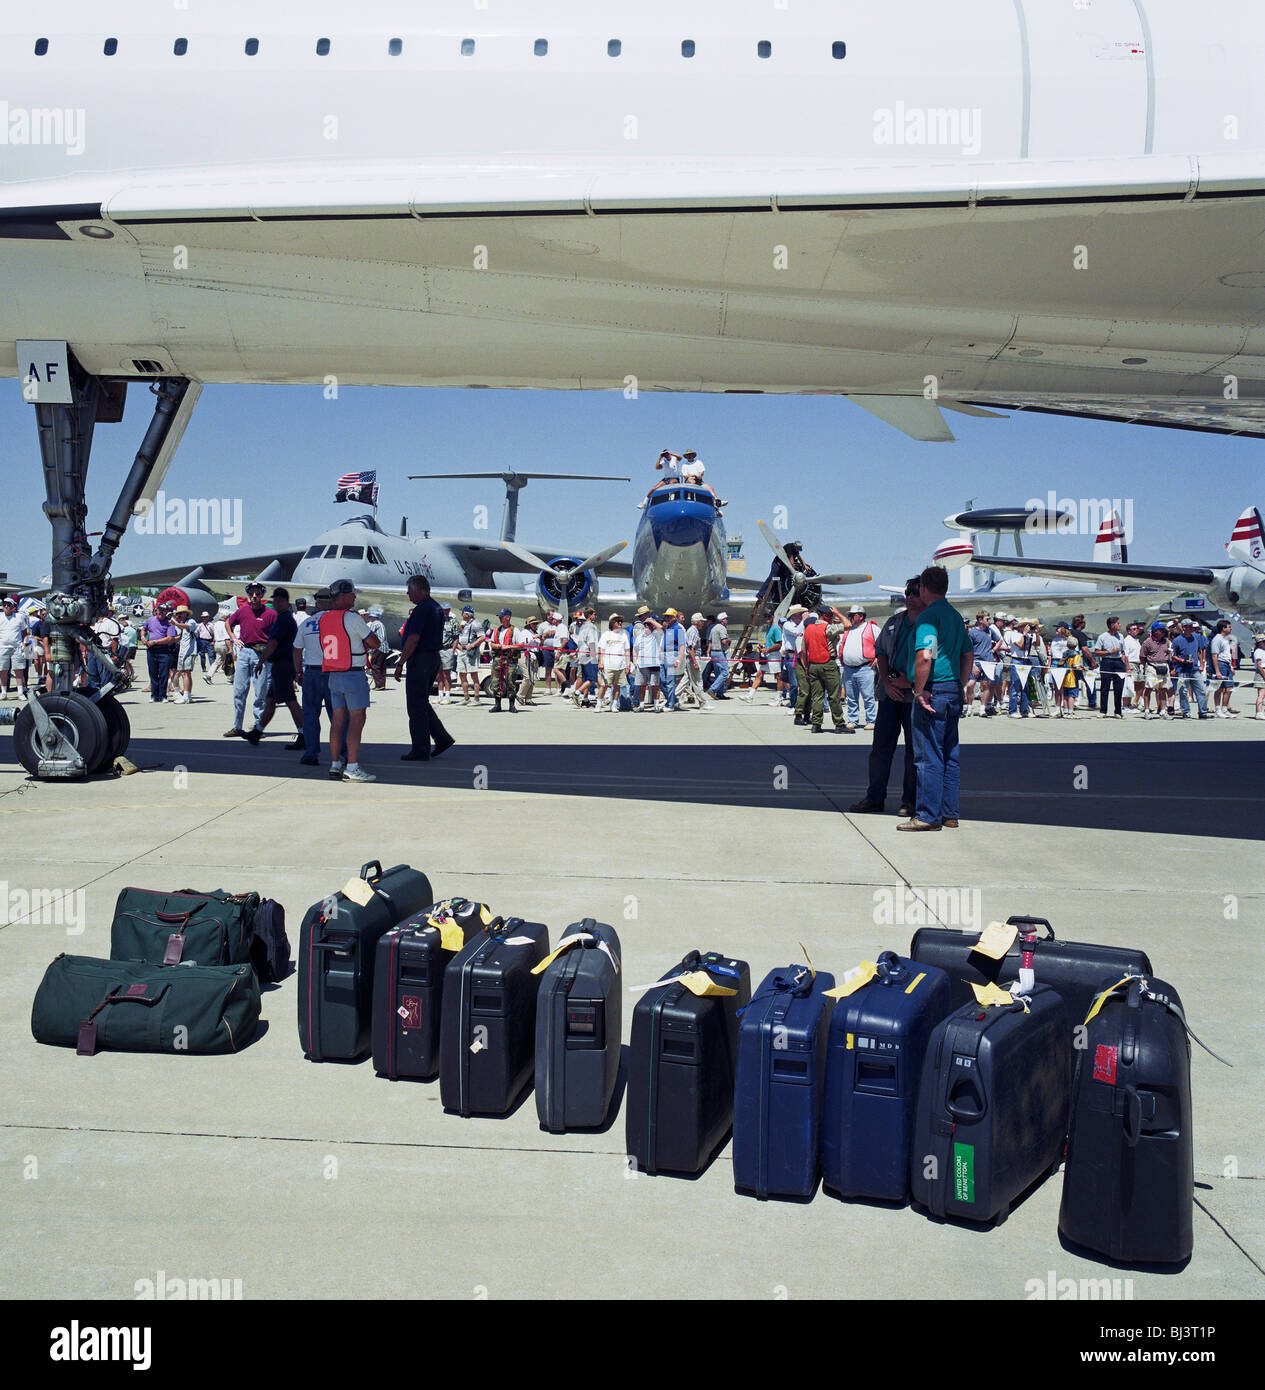 Baggage belonging to a British Airways Concorde crew lined up beneath aircraft at Oshkosh Air Venture, world’s largest air show. Stock Photo